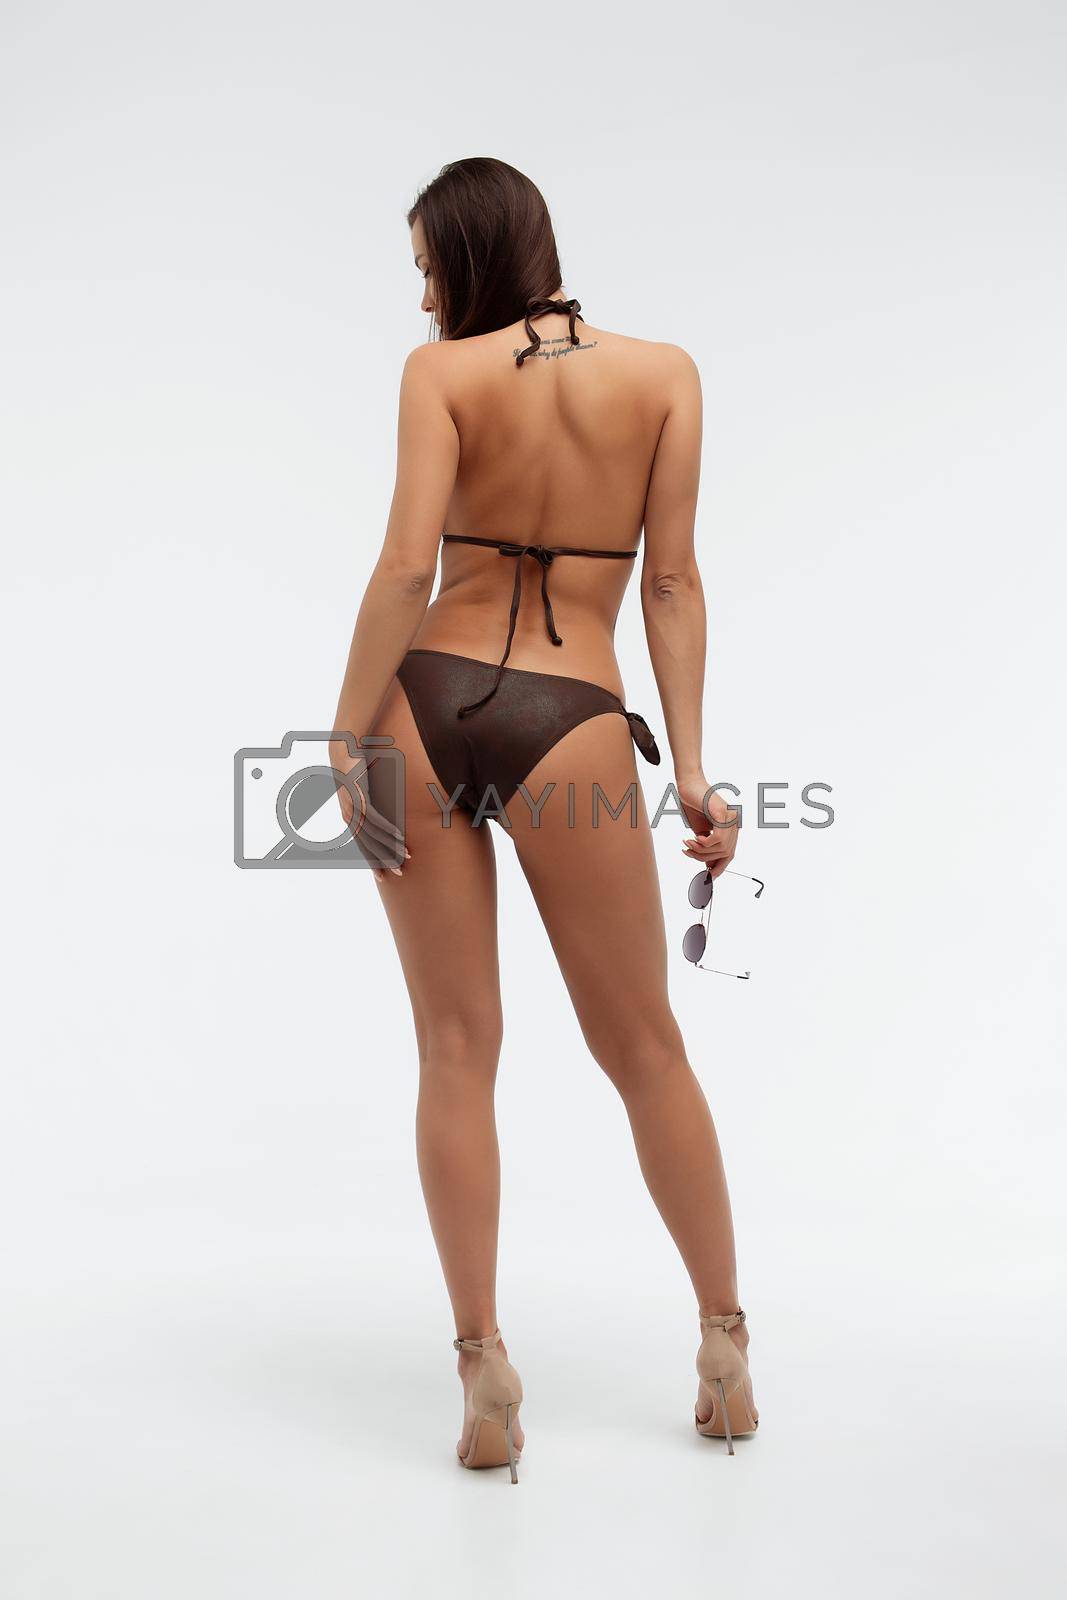 Royalty free image of Sexy slim model in stylish black swimsuit by 3KStudio